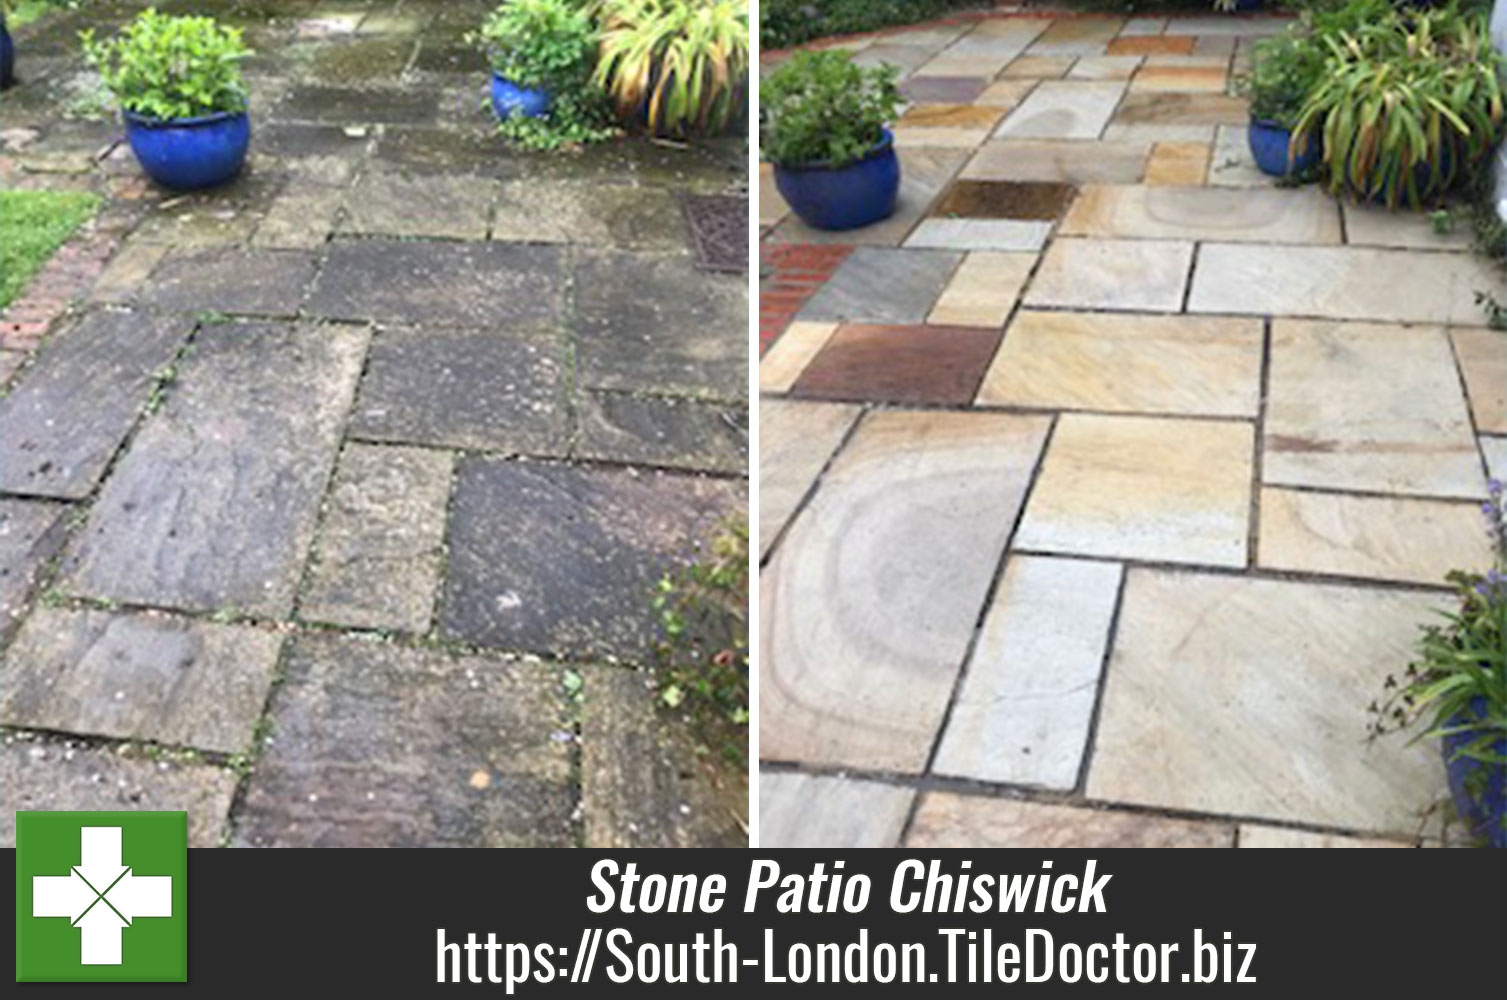 Deep Cleaning Indian Sandstone with Tile Doctor Brick and Driveway Cleaner in London